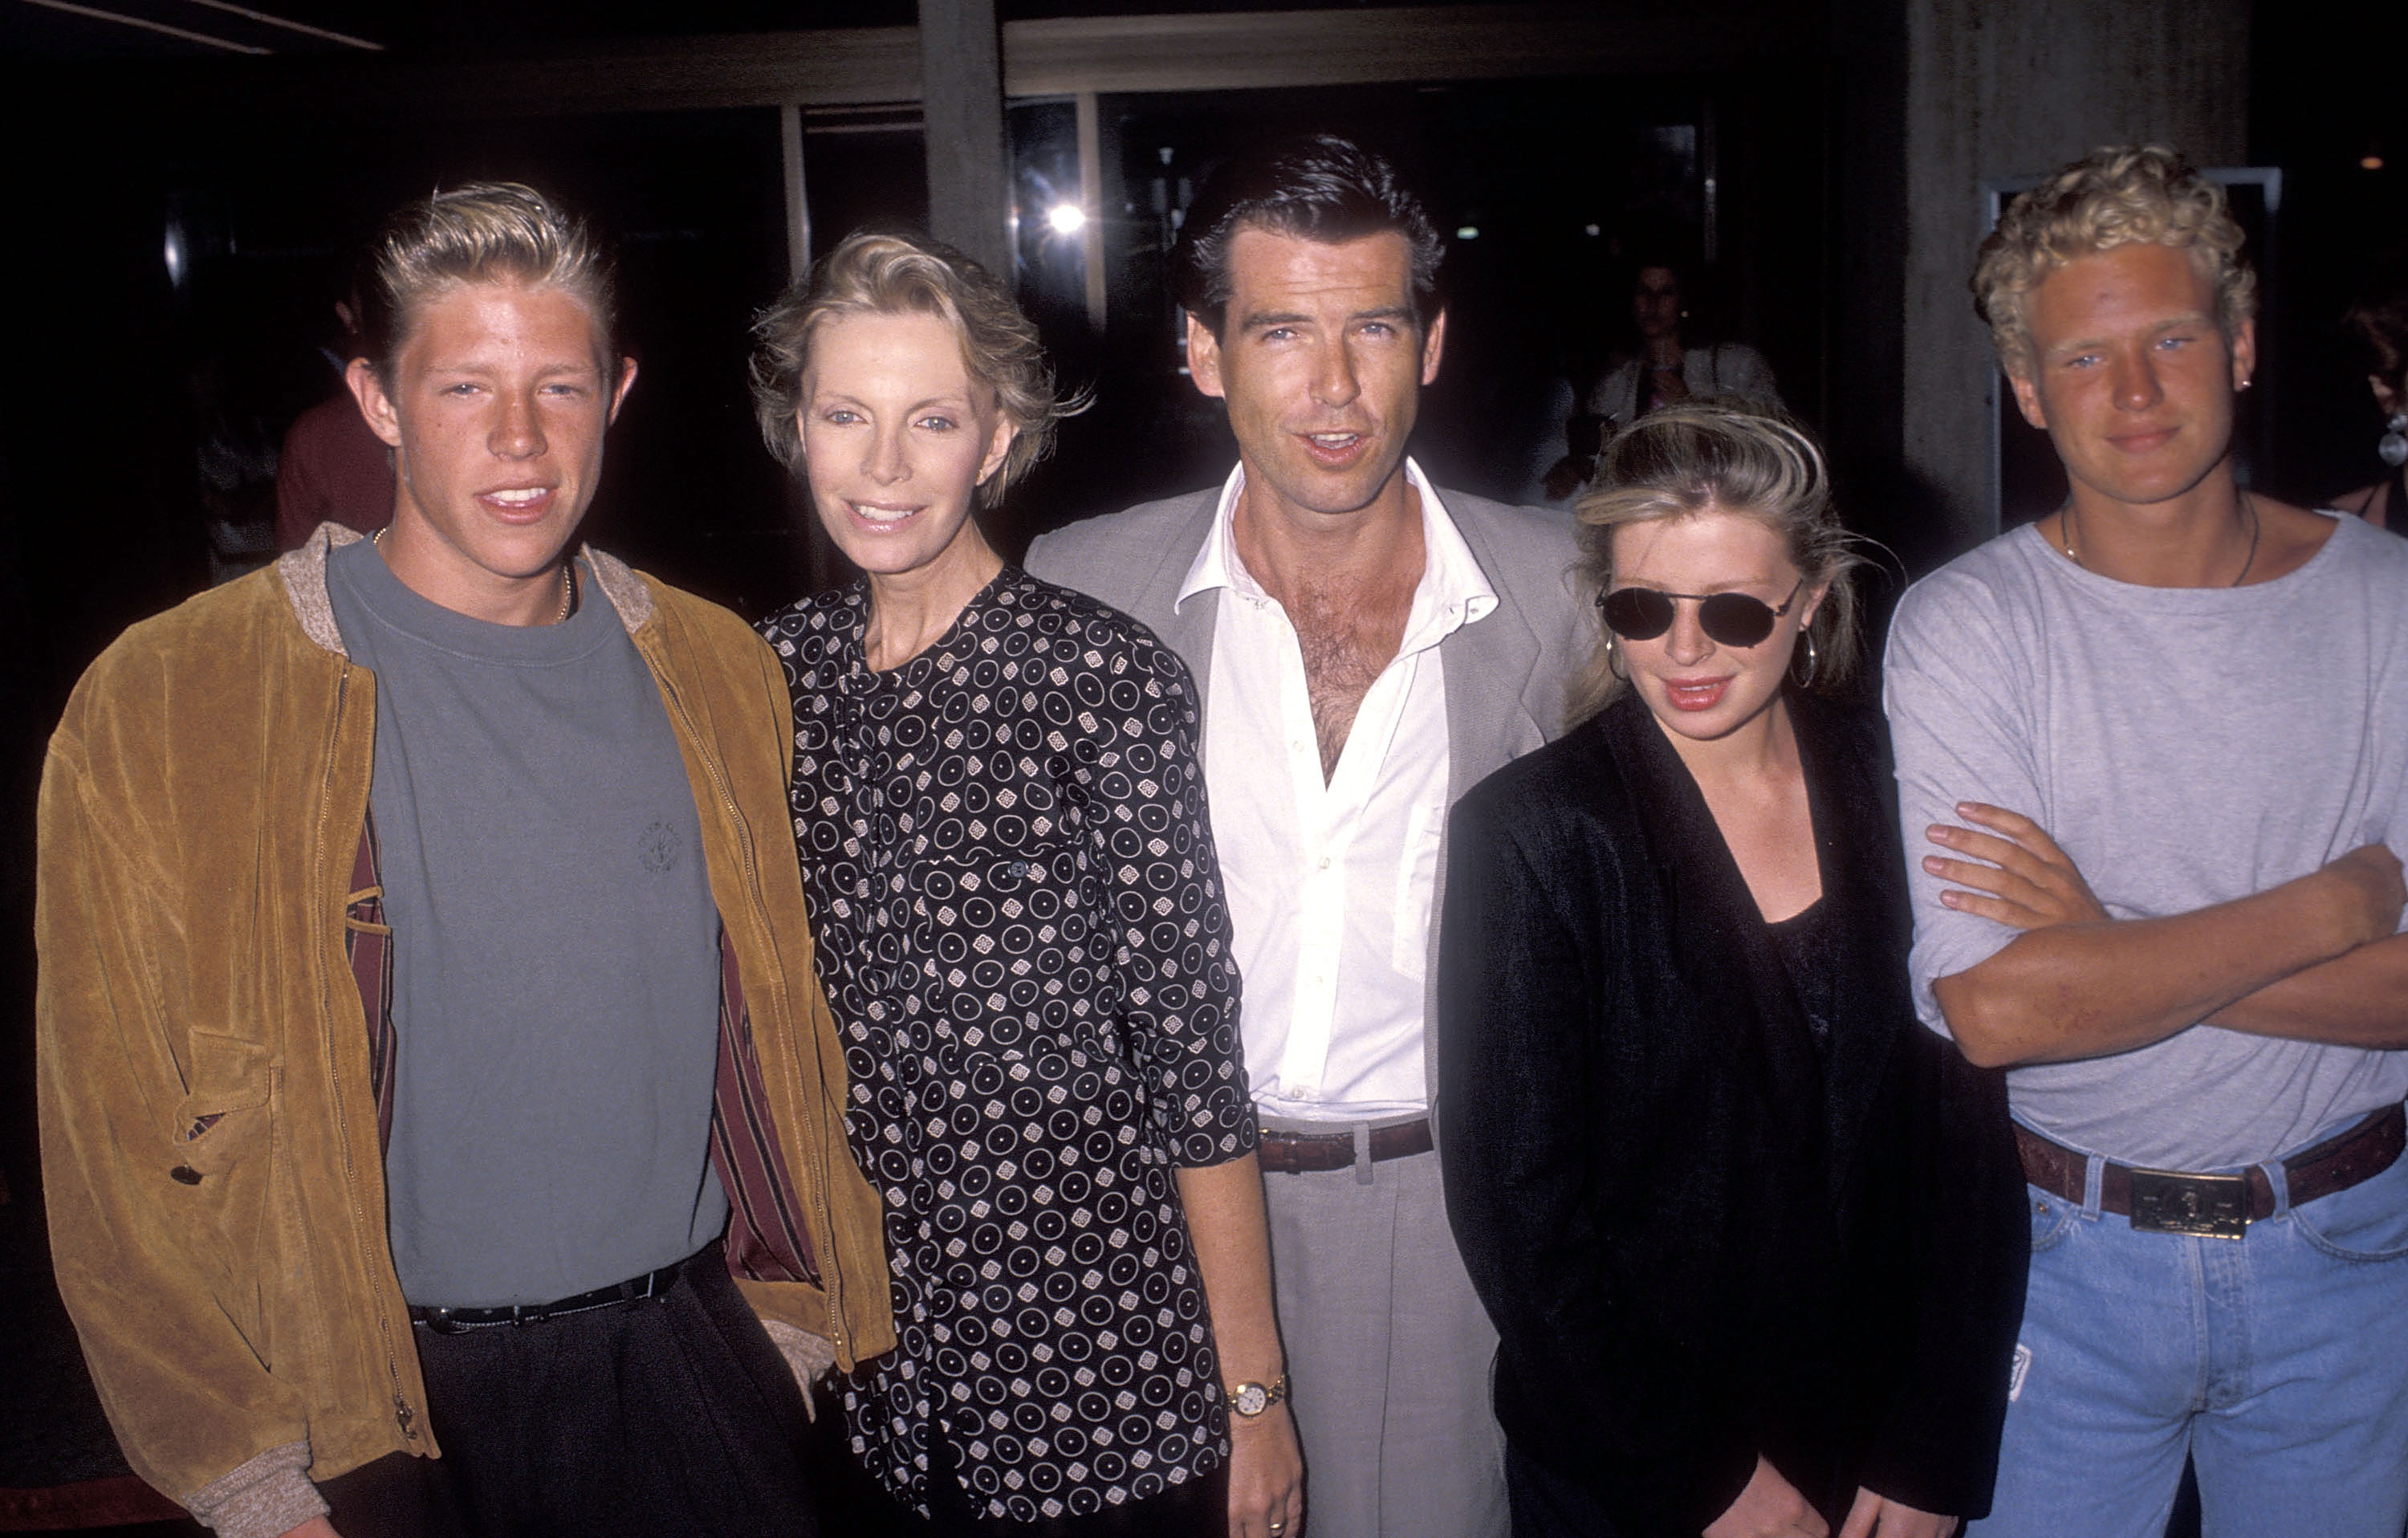 Pierce Brosnan and Cassandra Harris pictured with their son Christopher, daughter Charlotte, and son-in-law Alex Smith